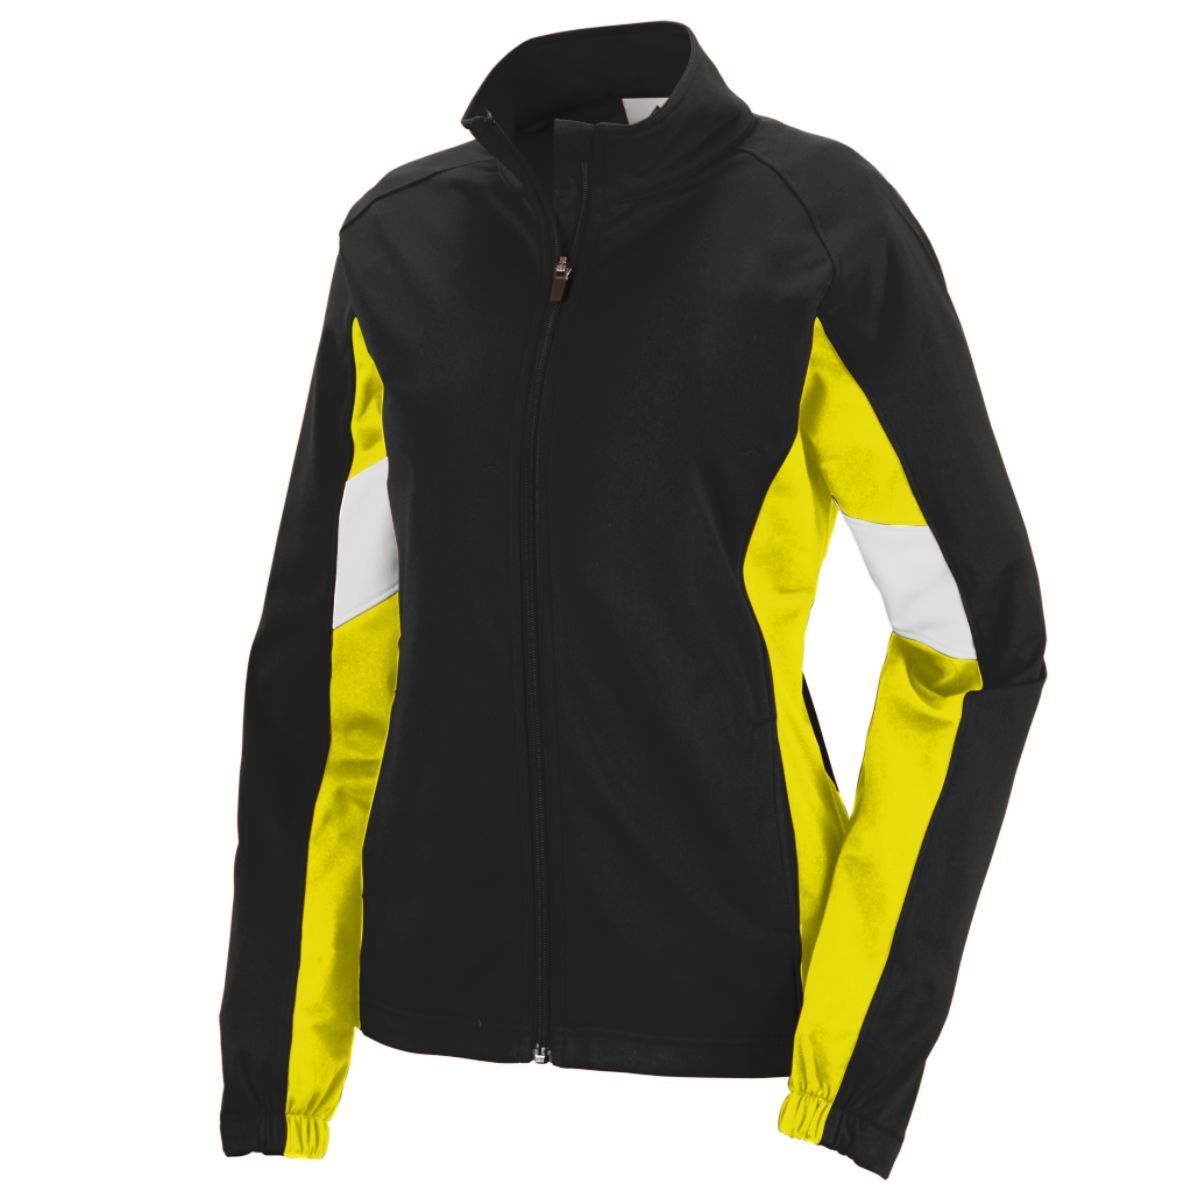 Augusta Sportswear Ladies Tour De Force Jacket in Black/Power Yellow/White  -Part of the Ladies, Ladies-Jacket, Augusta-Products, Outerwear product lines at KanaleyCreations.com